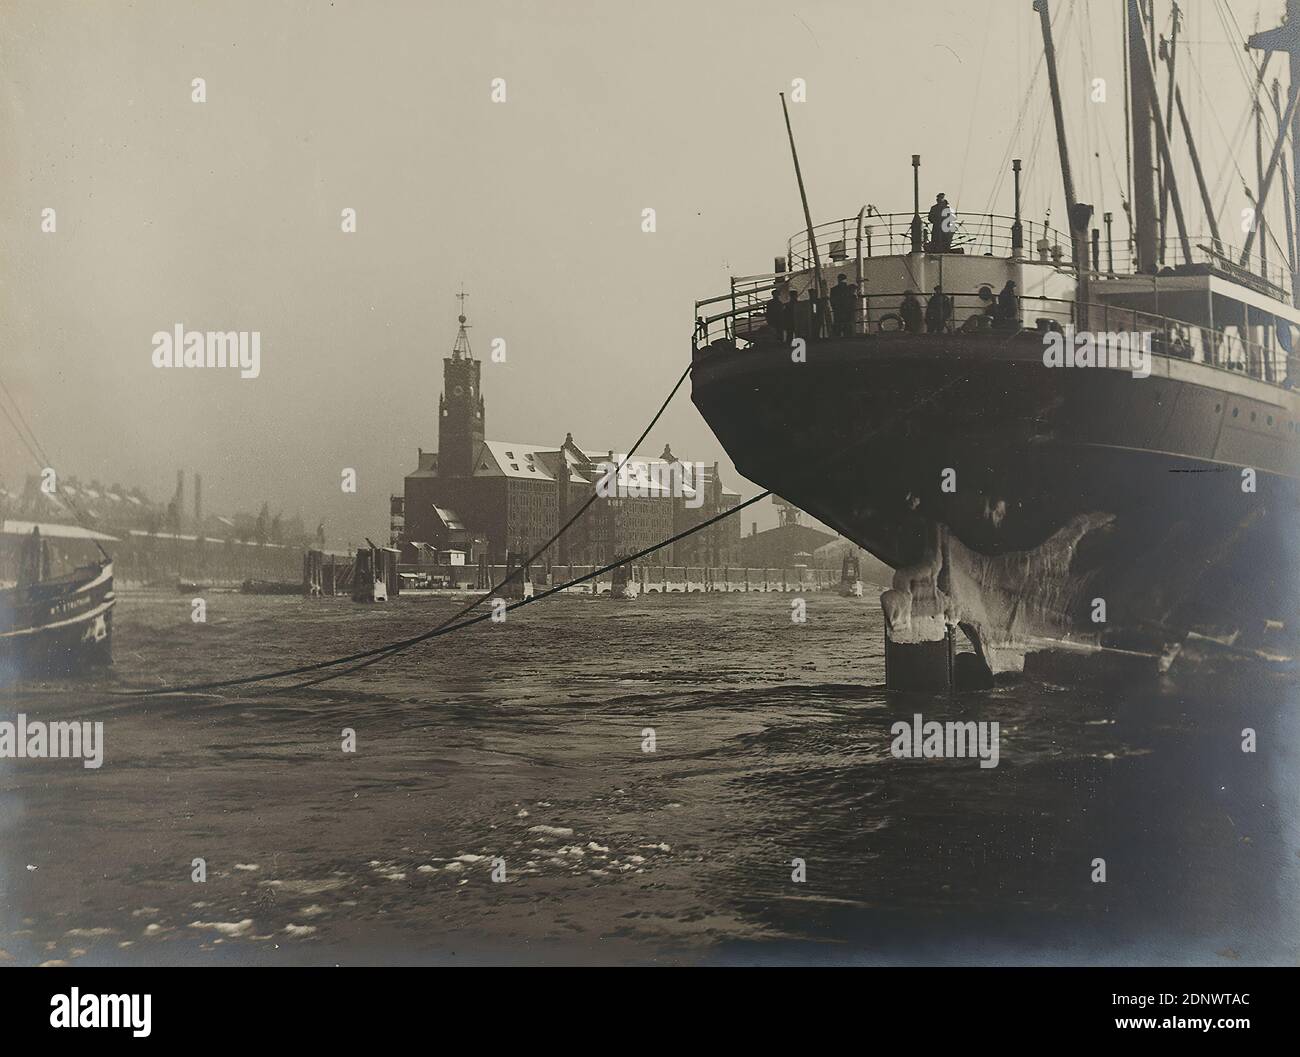 Heinrich von Seggern, Port of Hamburg, Staatliche Landesbildstelle Hamburg, collection on the history of photography, silver gelatin paper, black and white positive process, image size: height: 29.2 cm; width: 39.1 cm, signed and inscribed: recto u. r. on the cardboard: H. v. Seggern, inventory stamp and inscription of the Staatliche Landesbildstelle Hamburg, reporting photography, port, shipyard, dock, river Stock Photo